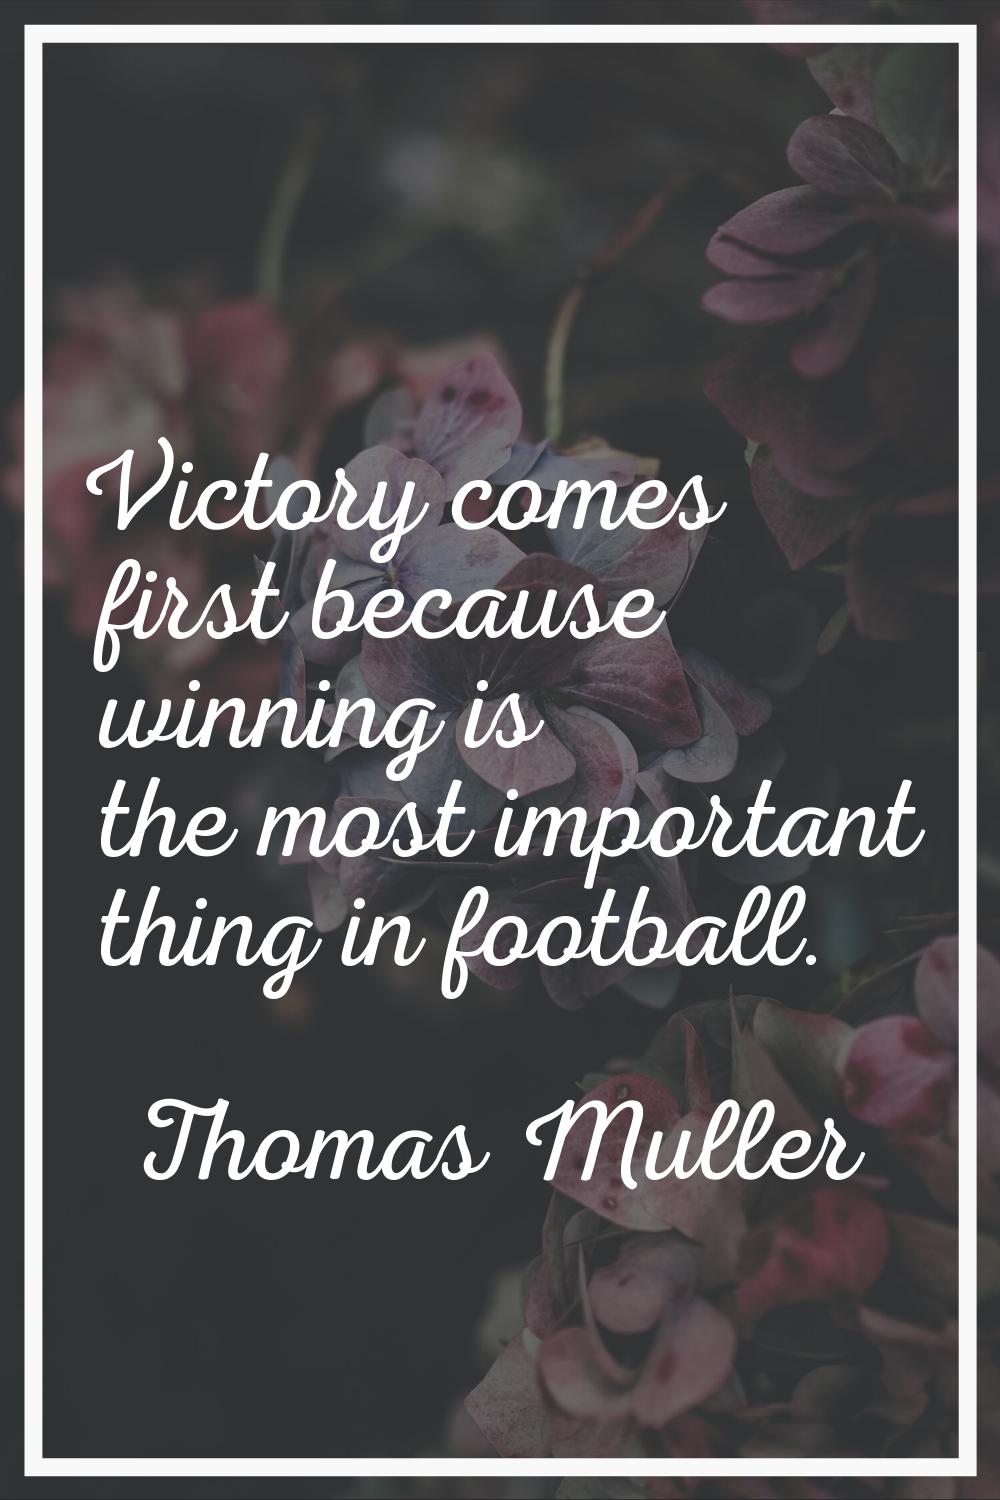 Victory comes first because winning is the most important thing in football.